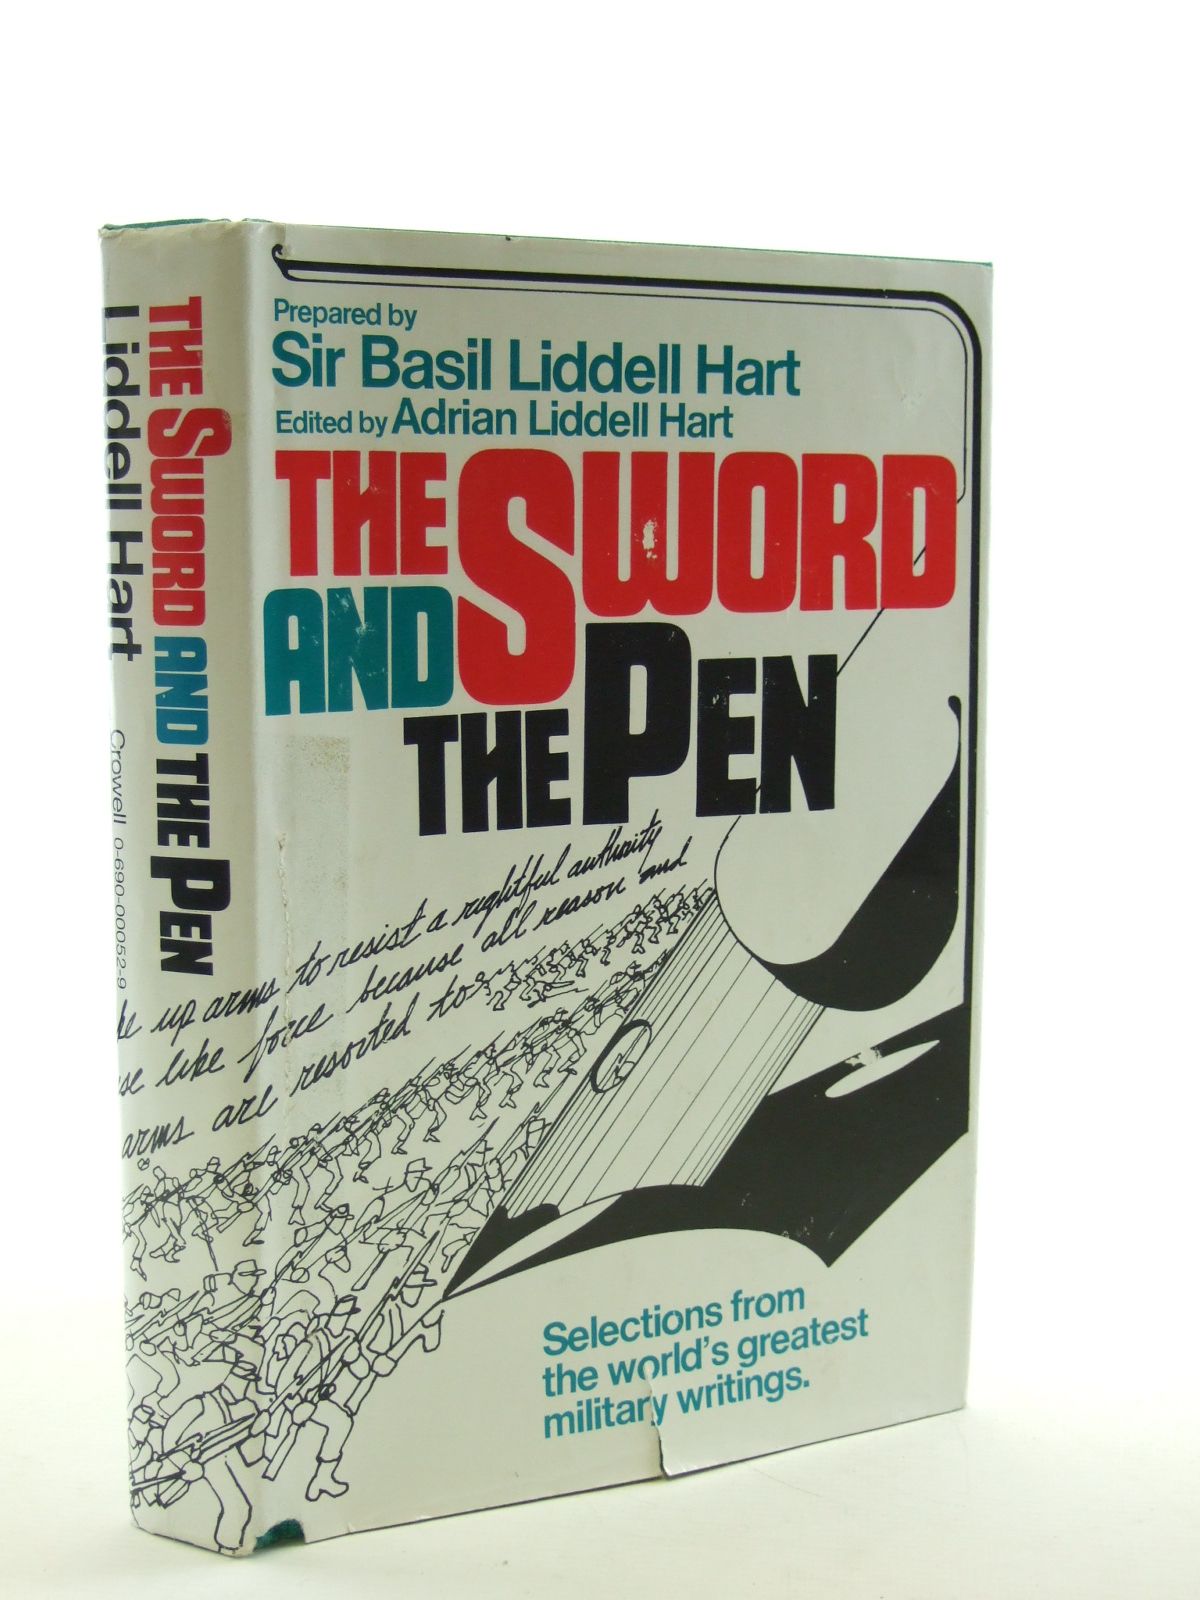 Photo of THE SWORD AND THE PEN written by Hart, B.H. Liddell Hart, Adrian Liddell published by Thomas Y. Crowell Co. (STOCK CODE: 2108453)  for sale by Stella & Rose's Books